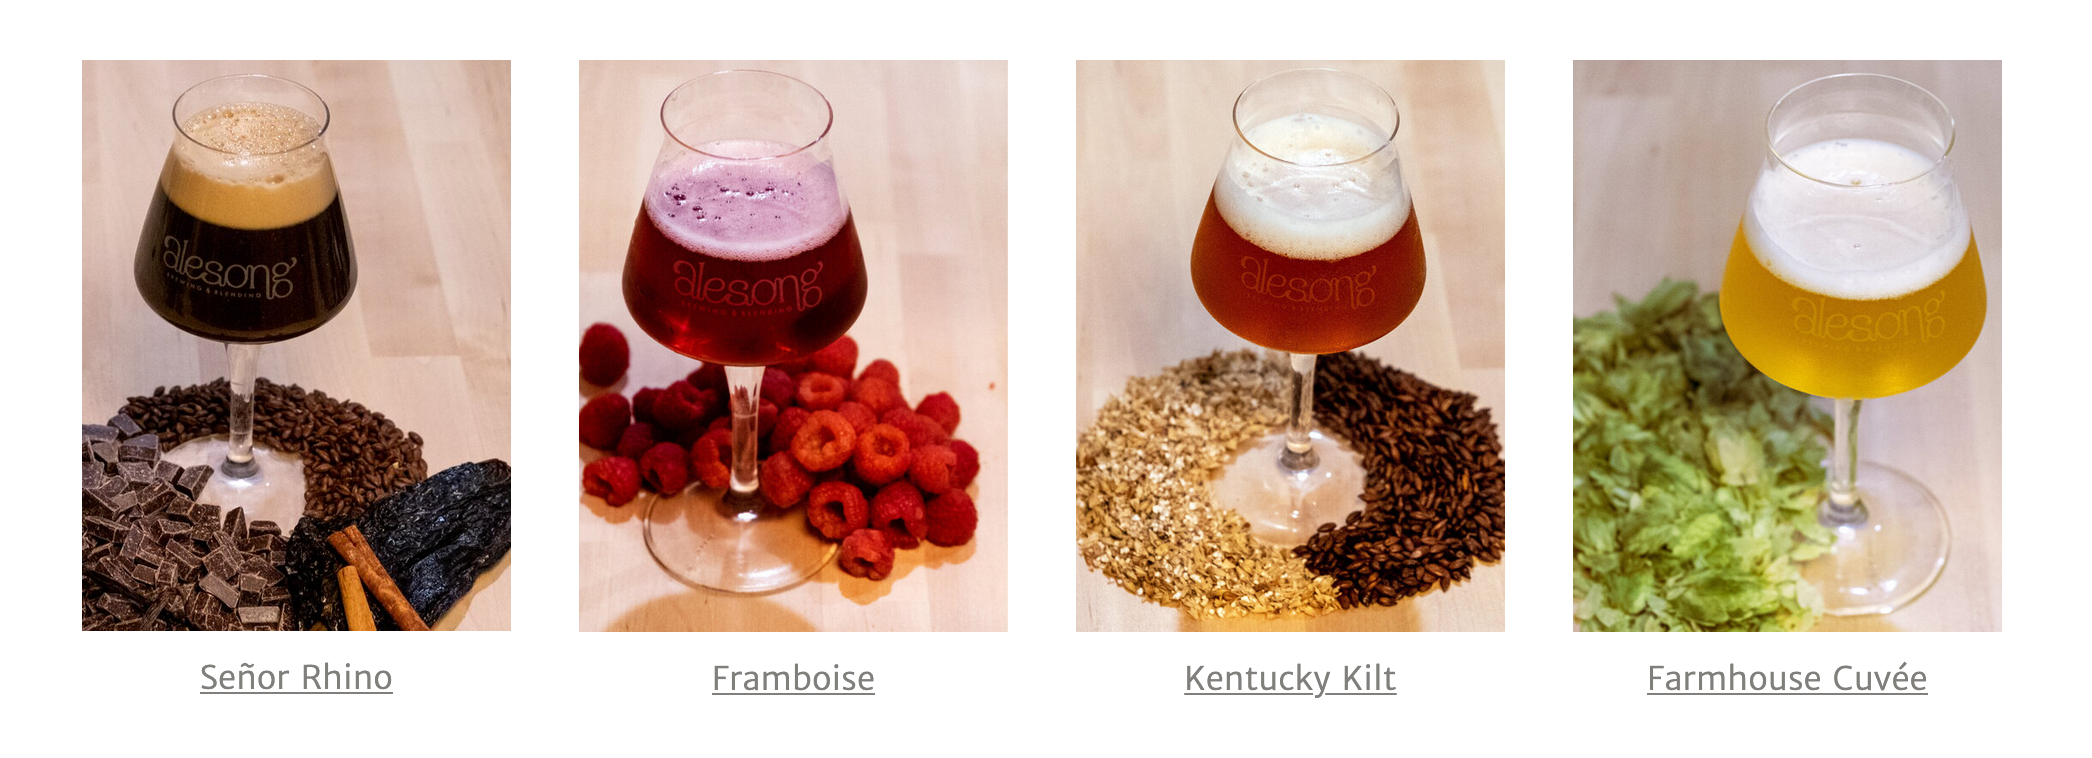 Alesong Brewing & Blending March 2020 Beer Releases - Señor Rhino, Framboise, Kentucky Kilt, and Farmhouse Cuvée